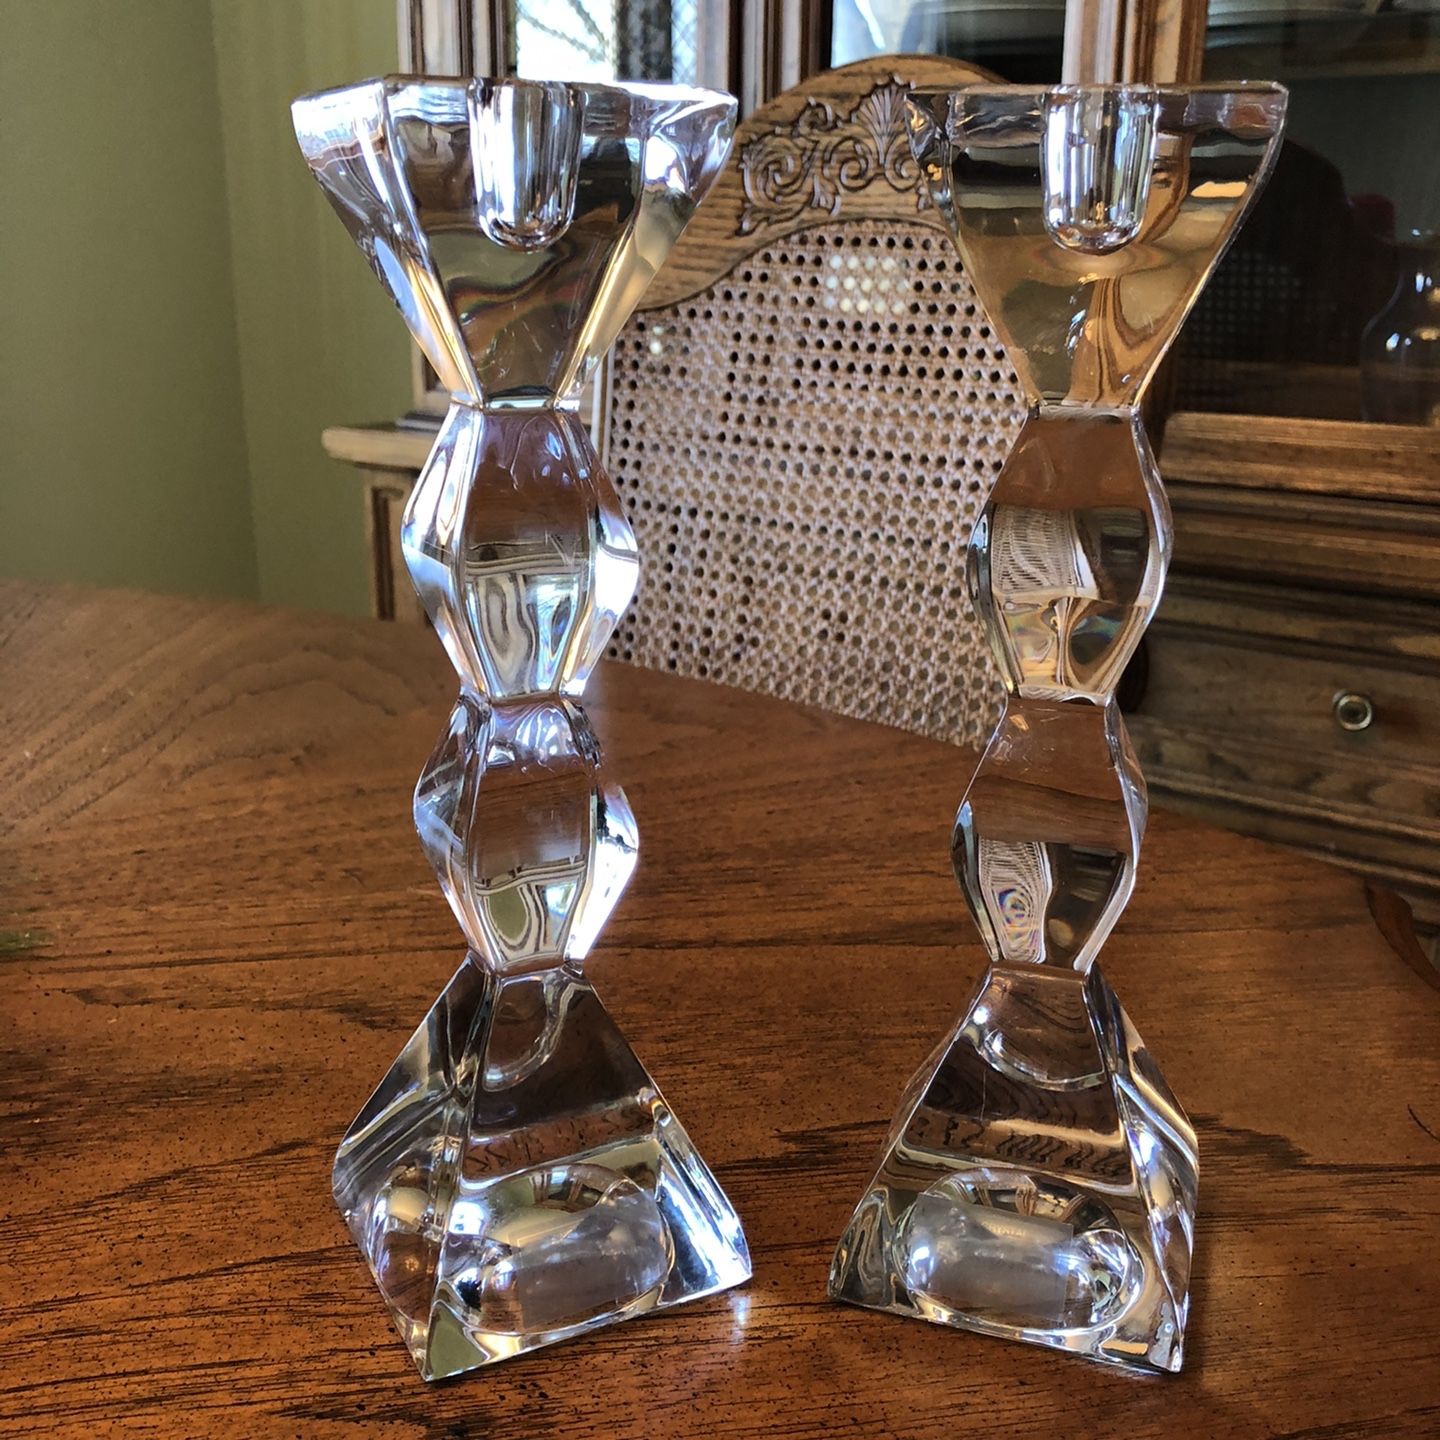 2 Lenox Ovations Crystal Candle Stick Holders